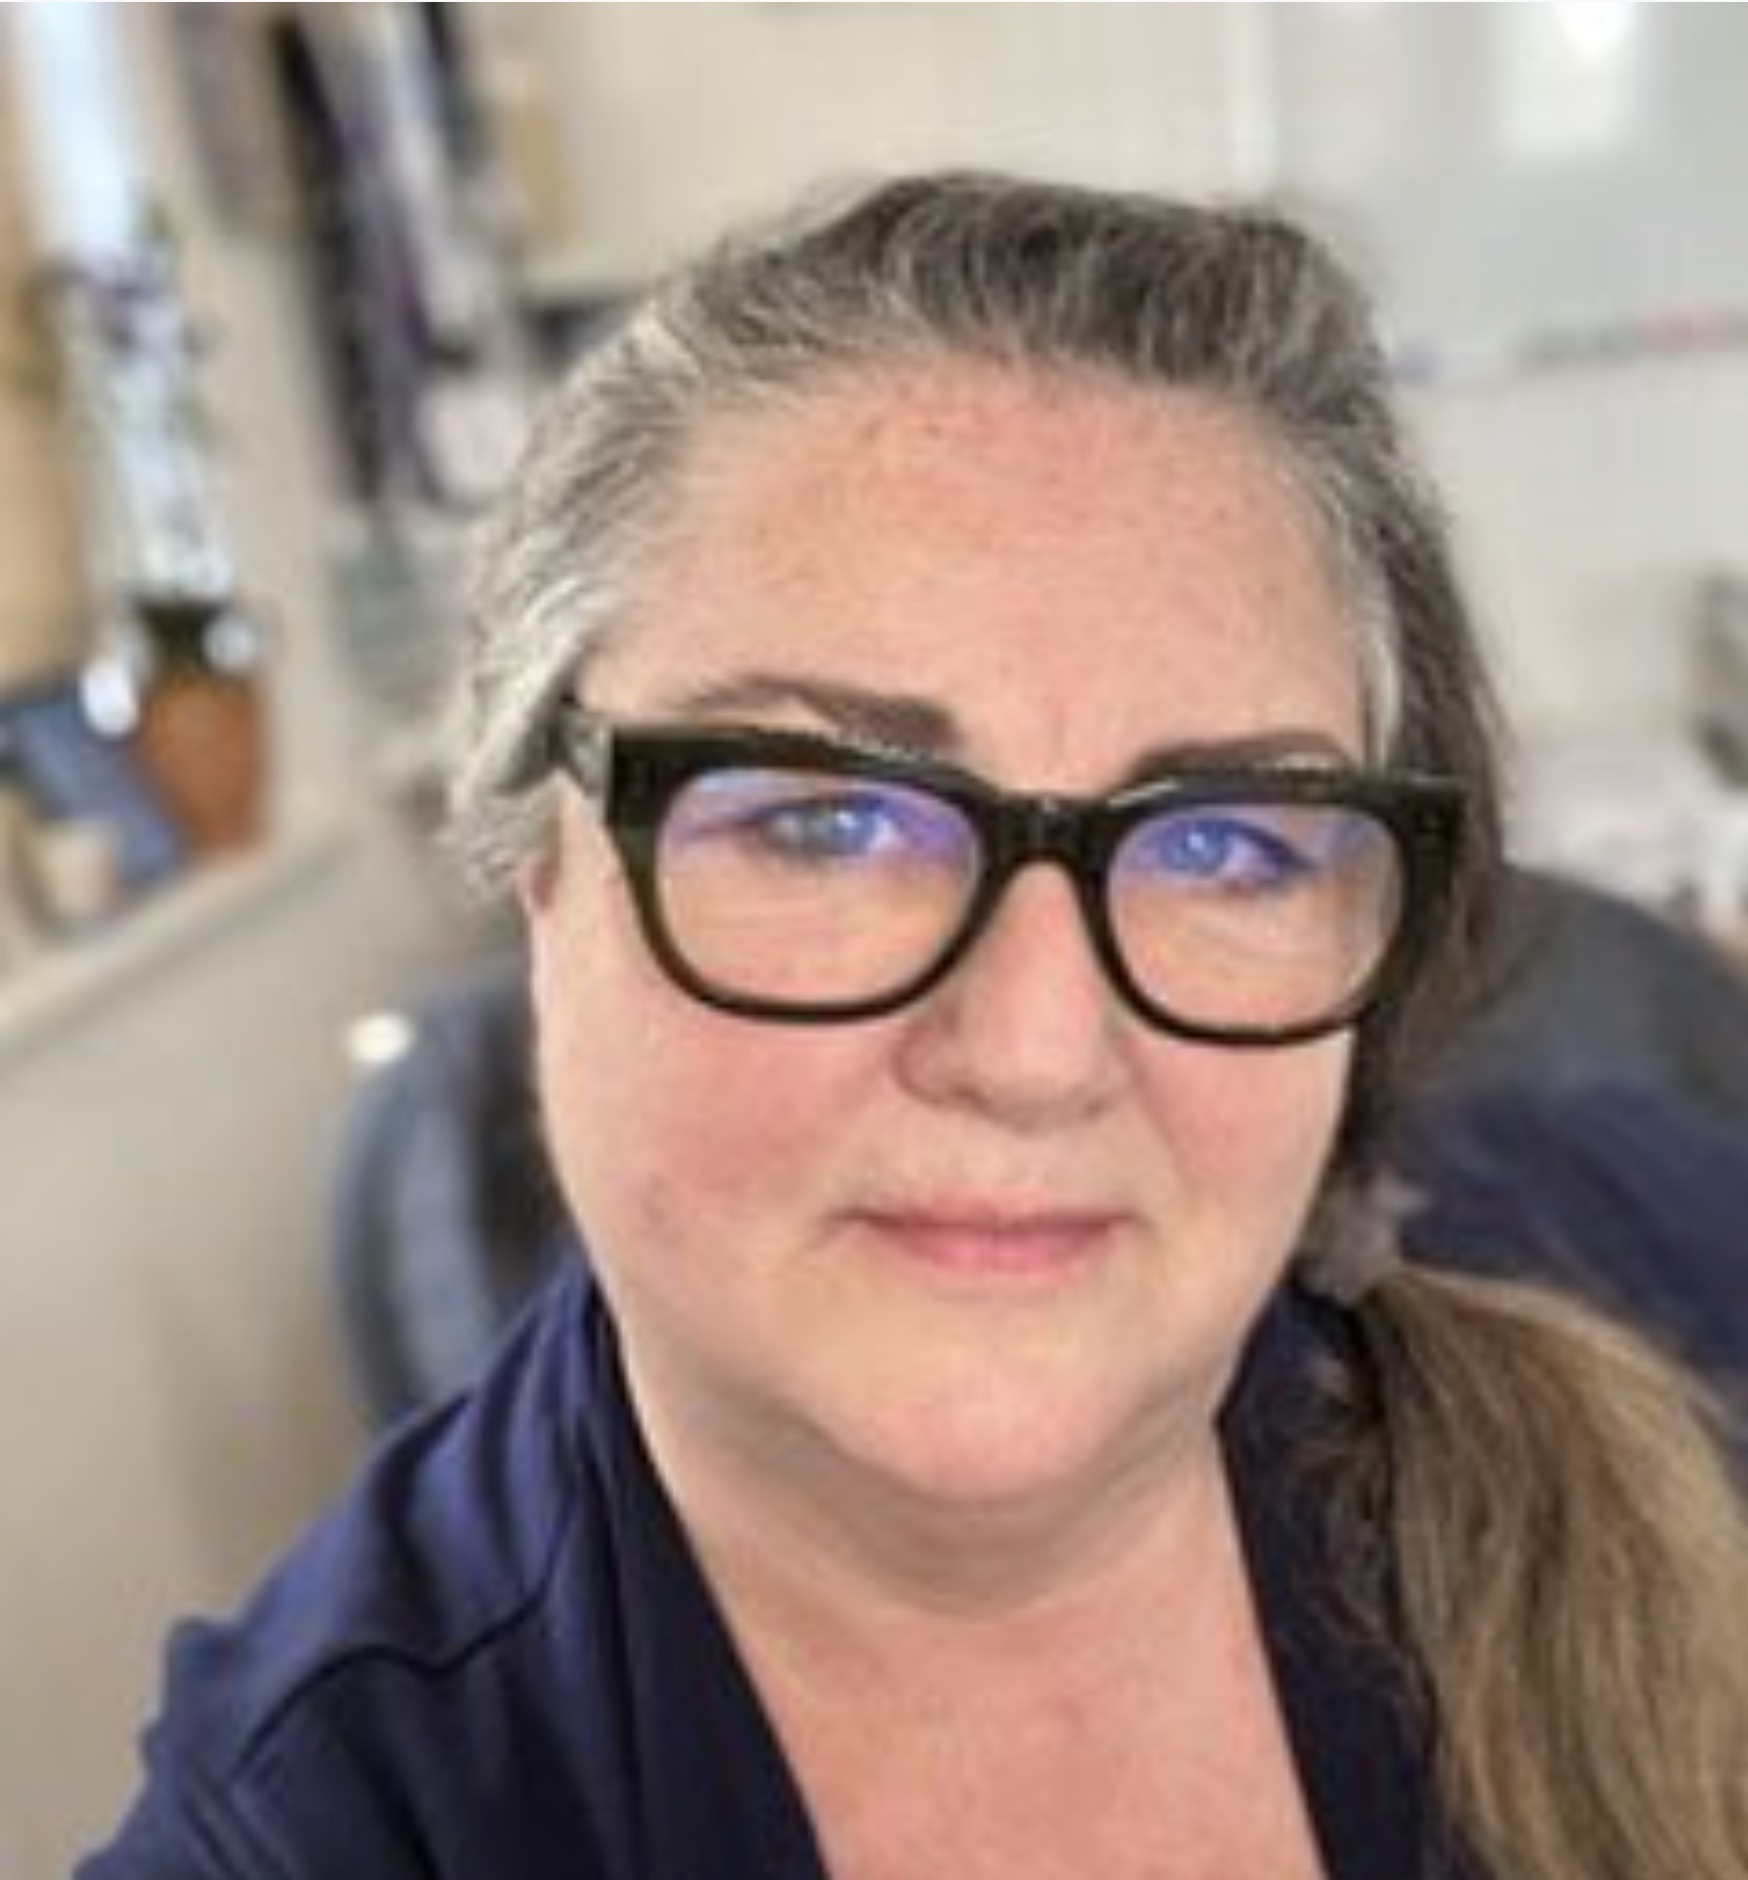 Headshot of Cathy Farmer. Cathy wears black glasses and a navy blue shirt.